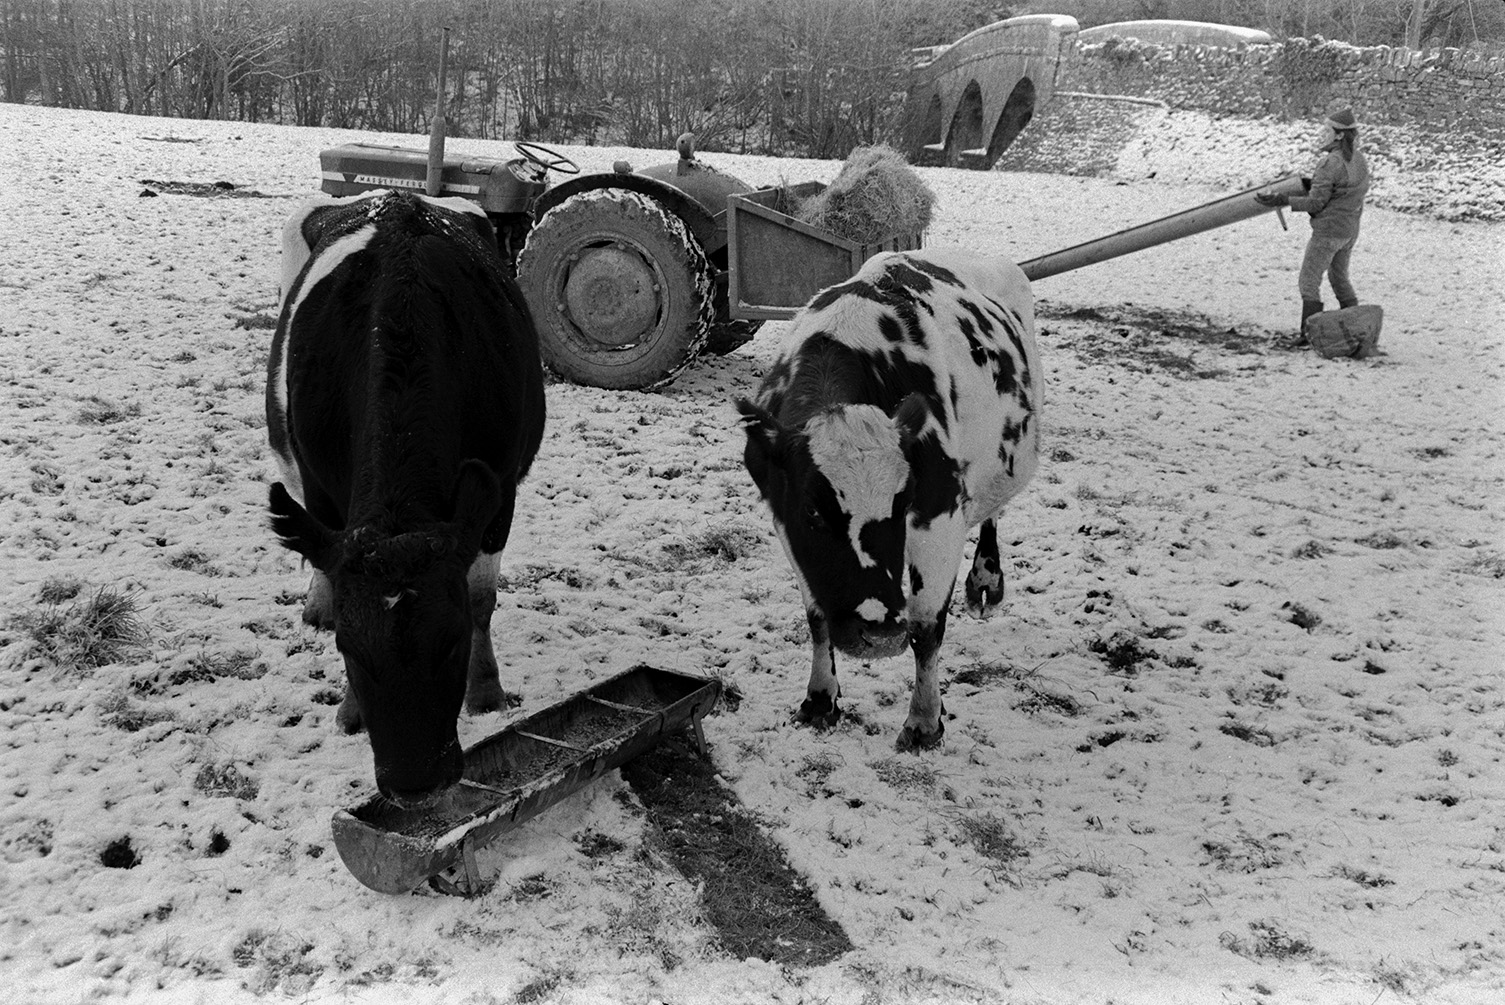 Derek Bright feeding cattle in a snow covered field at Mill Road Farm next to Beaford Bridge, which is visible in the background. Two cows are eating from a trough and Derek is moving another trough in the background. A tractor with a link box full of hay is nearby. The farm was also known as Jeffrys.